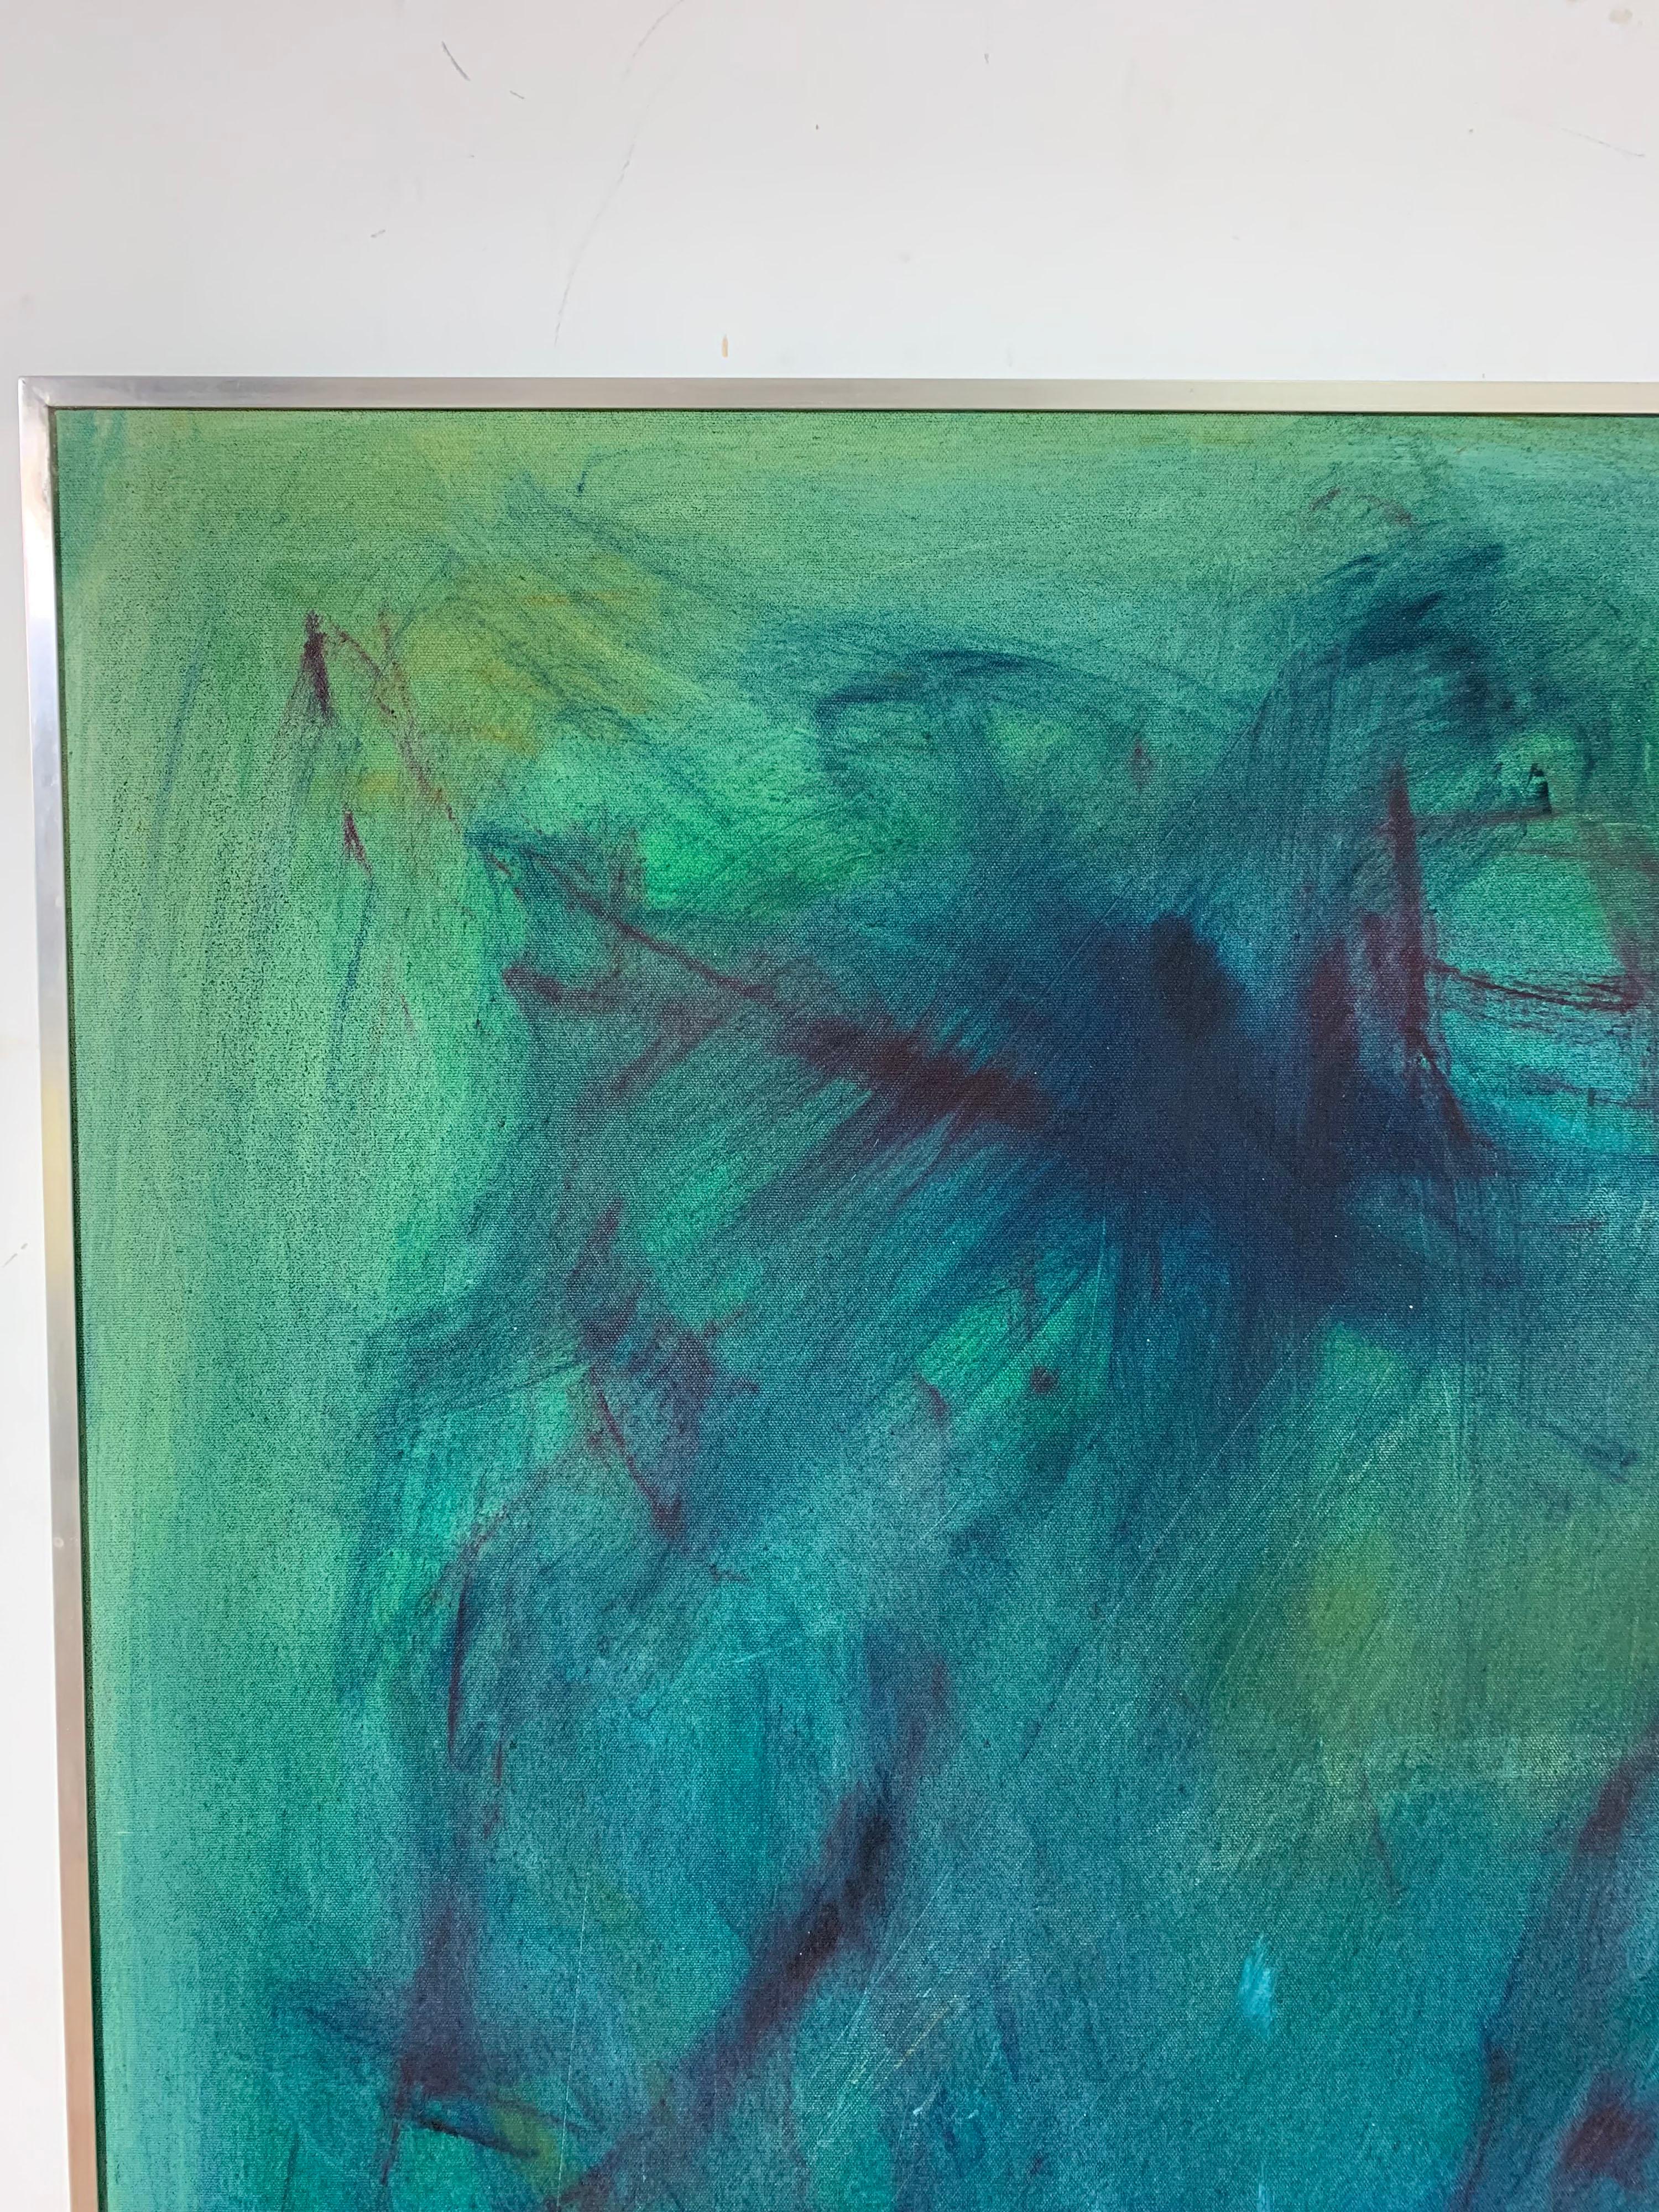 Mid-Century Modern Expressionist Painting by Sinai Waxman, D. 1961